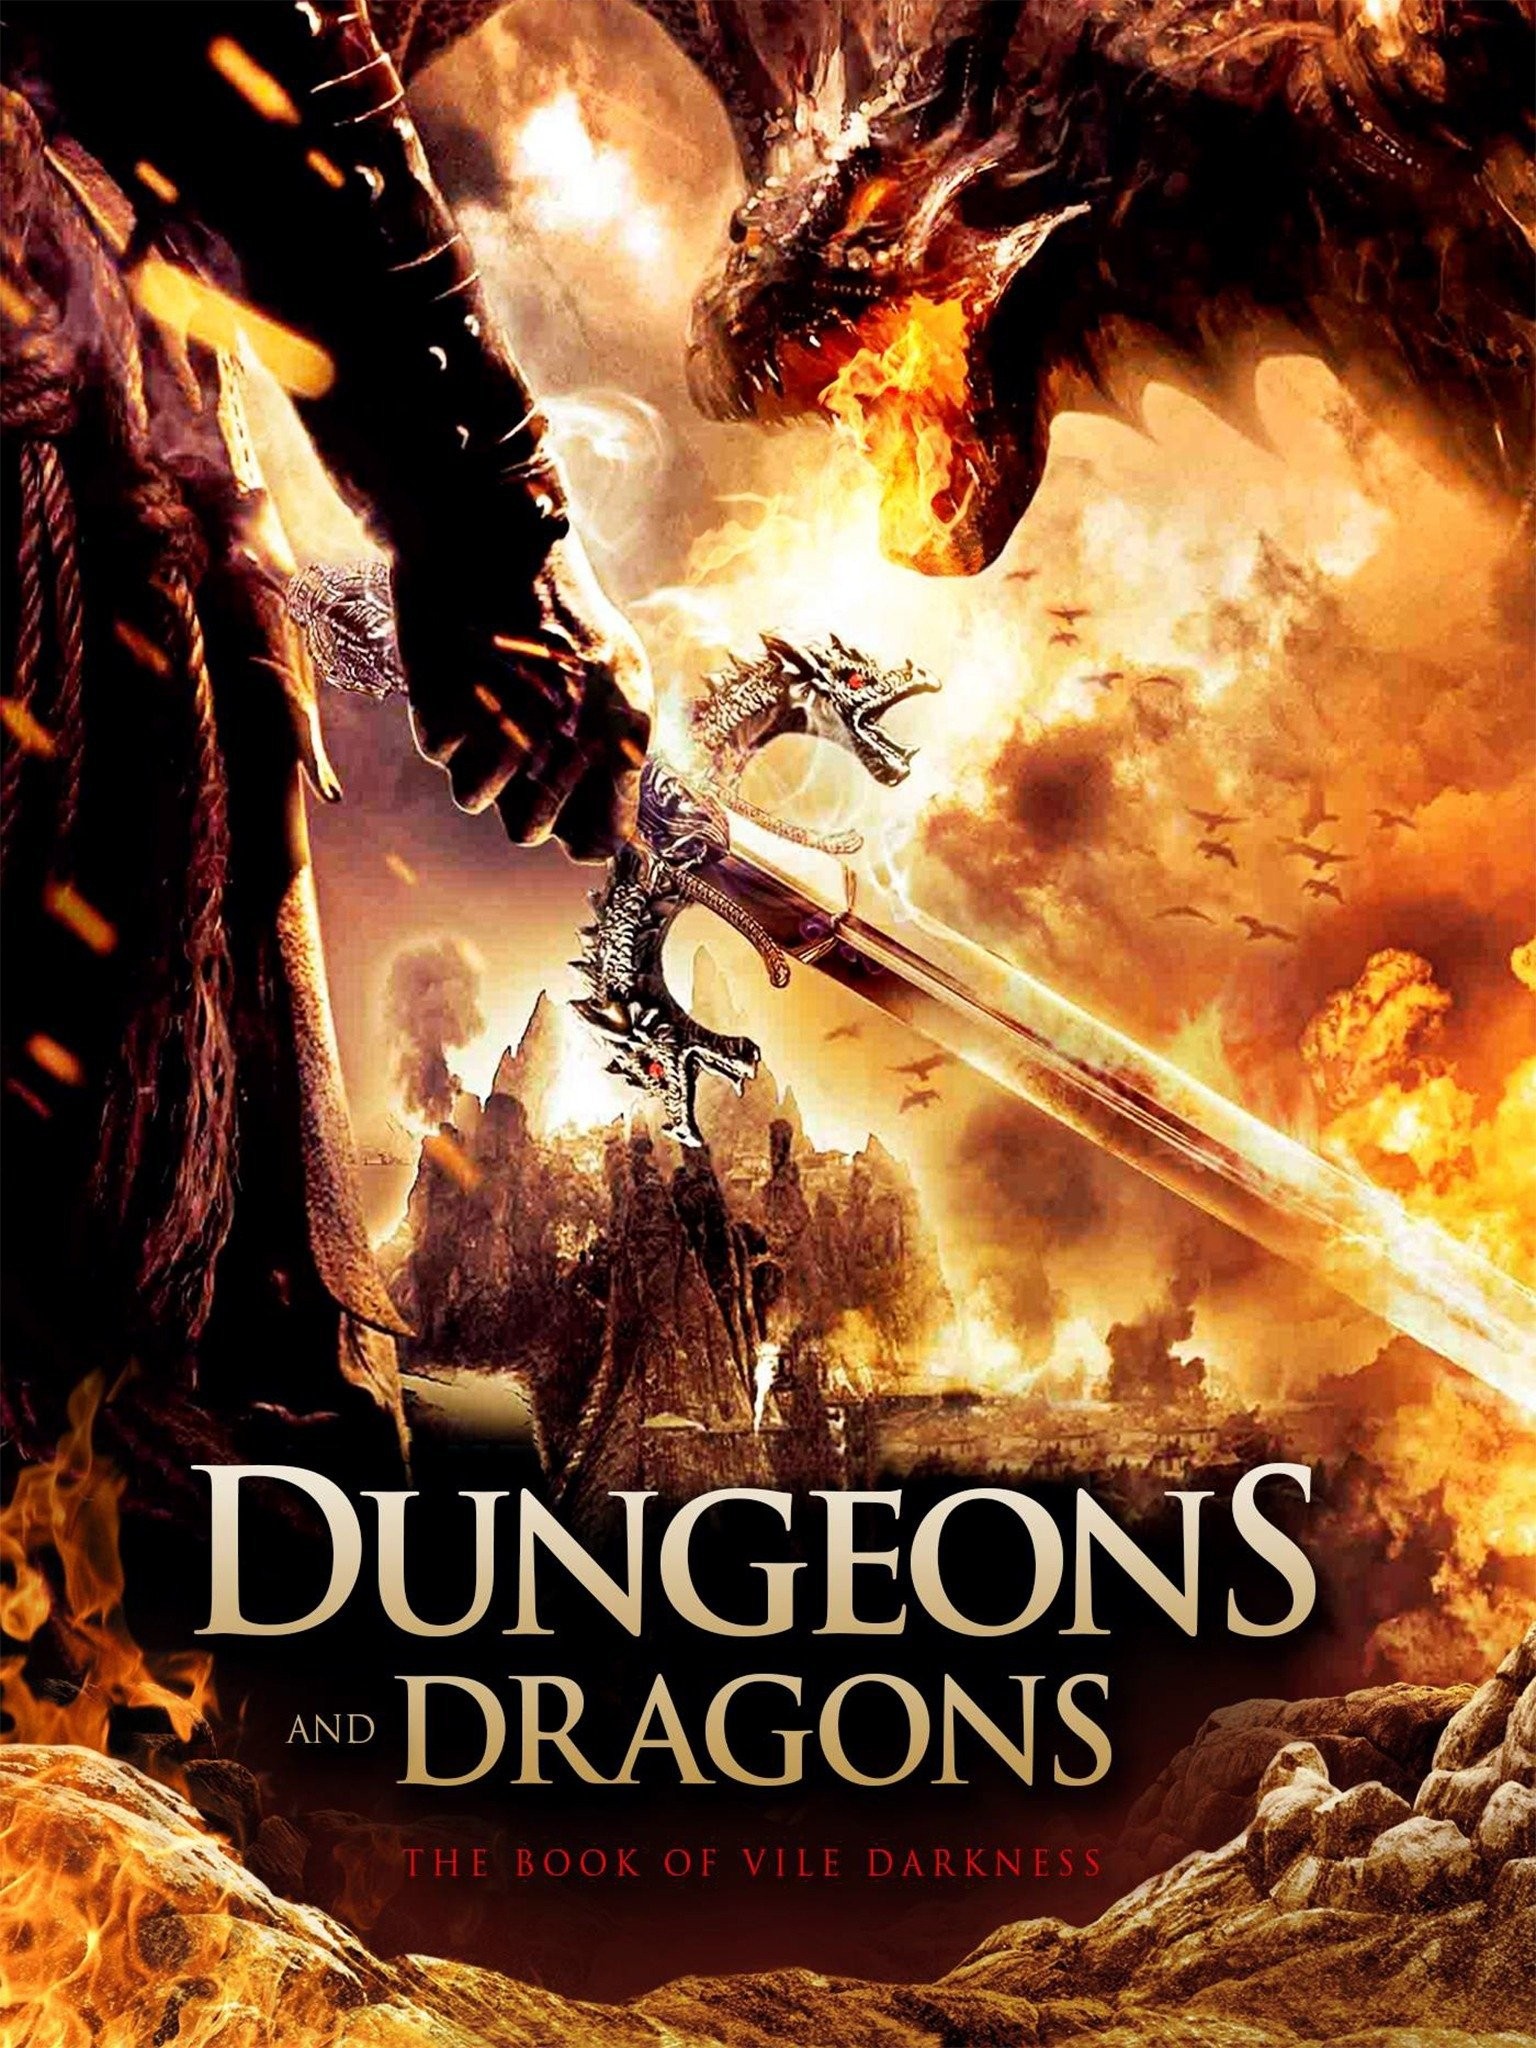 Dungeons & Dragons: The Book of Vile Darkness   Rotten Tomatoes